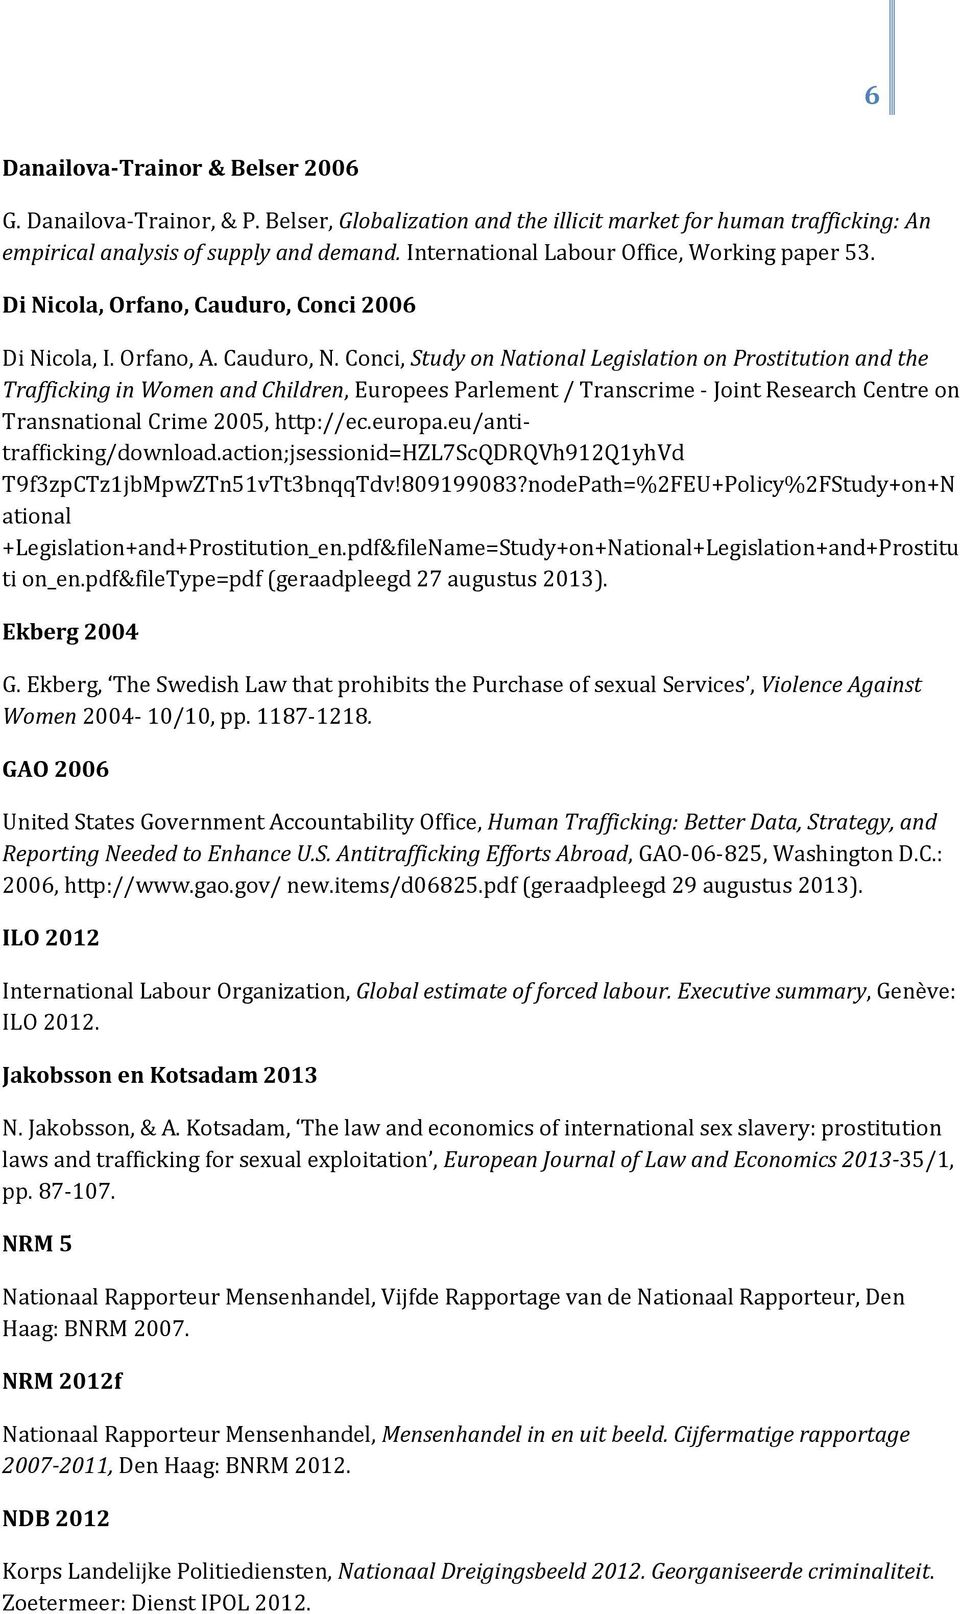 Conci, Study on National Legislation on Prostitution and the Trafficking in Women and Children, Europees Parlement / Transcrime - Joint Research Centre on Transnational Crime 2005, http://ec.europa.